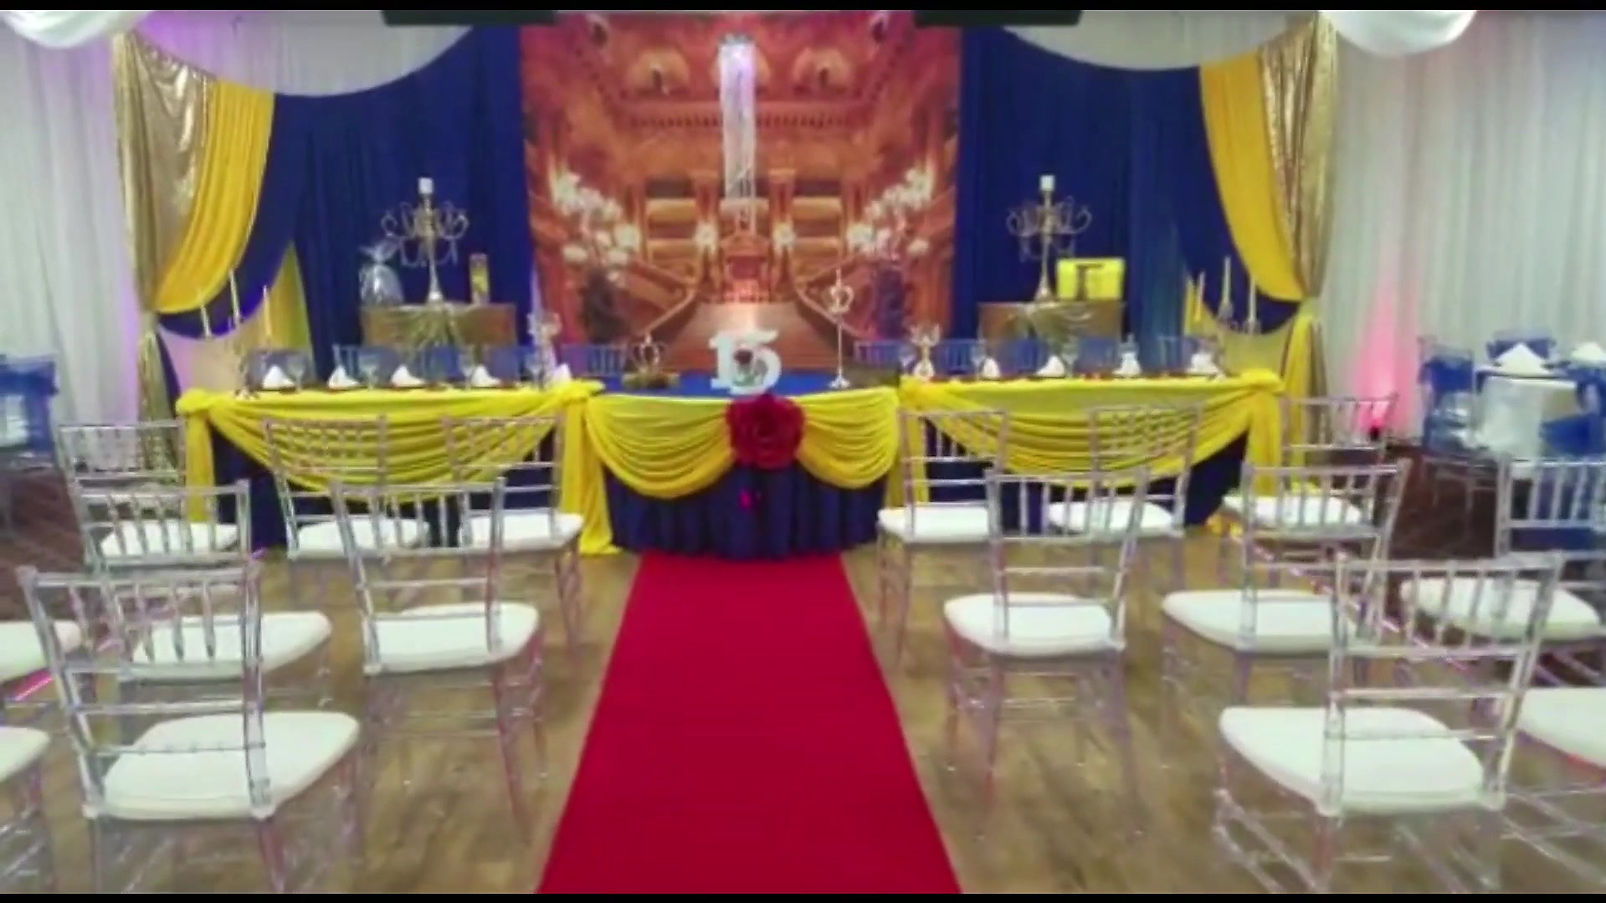 Welcome to AV Banquet Hall